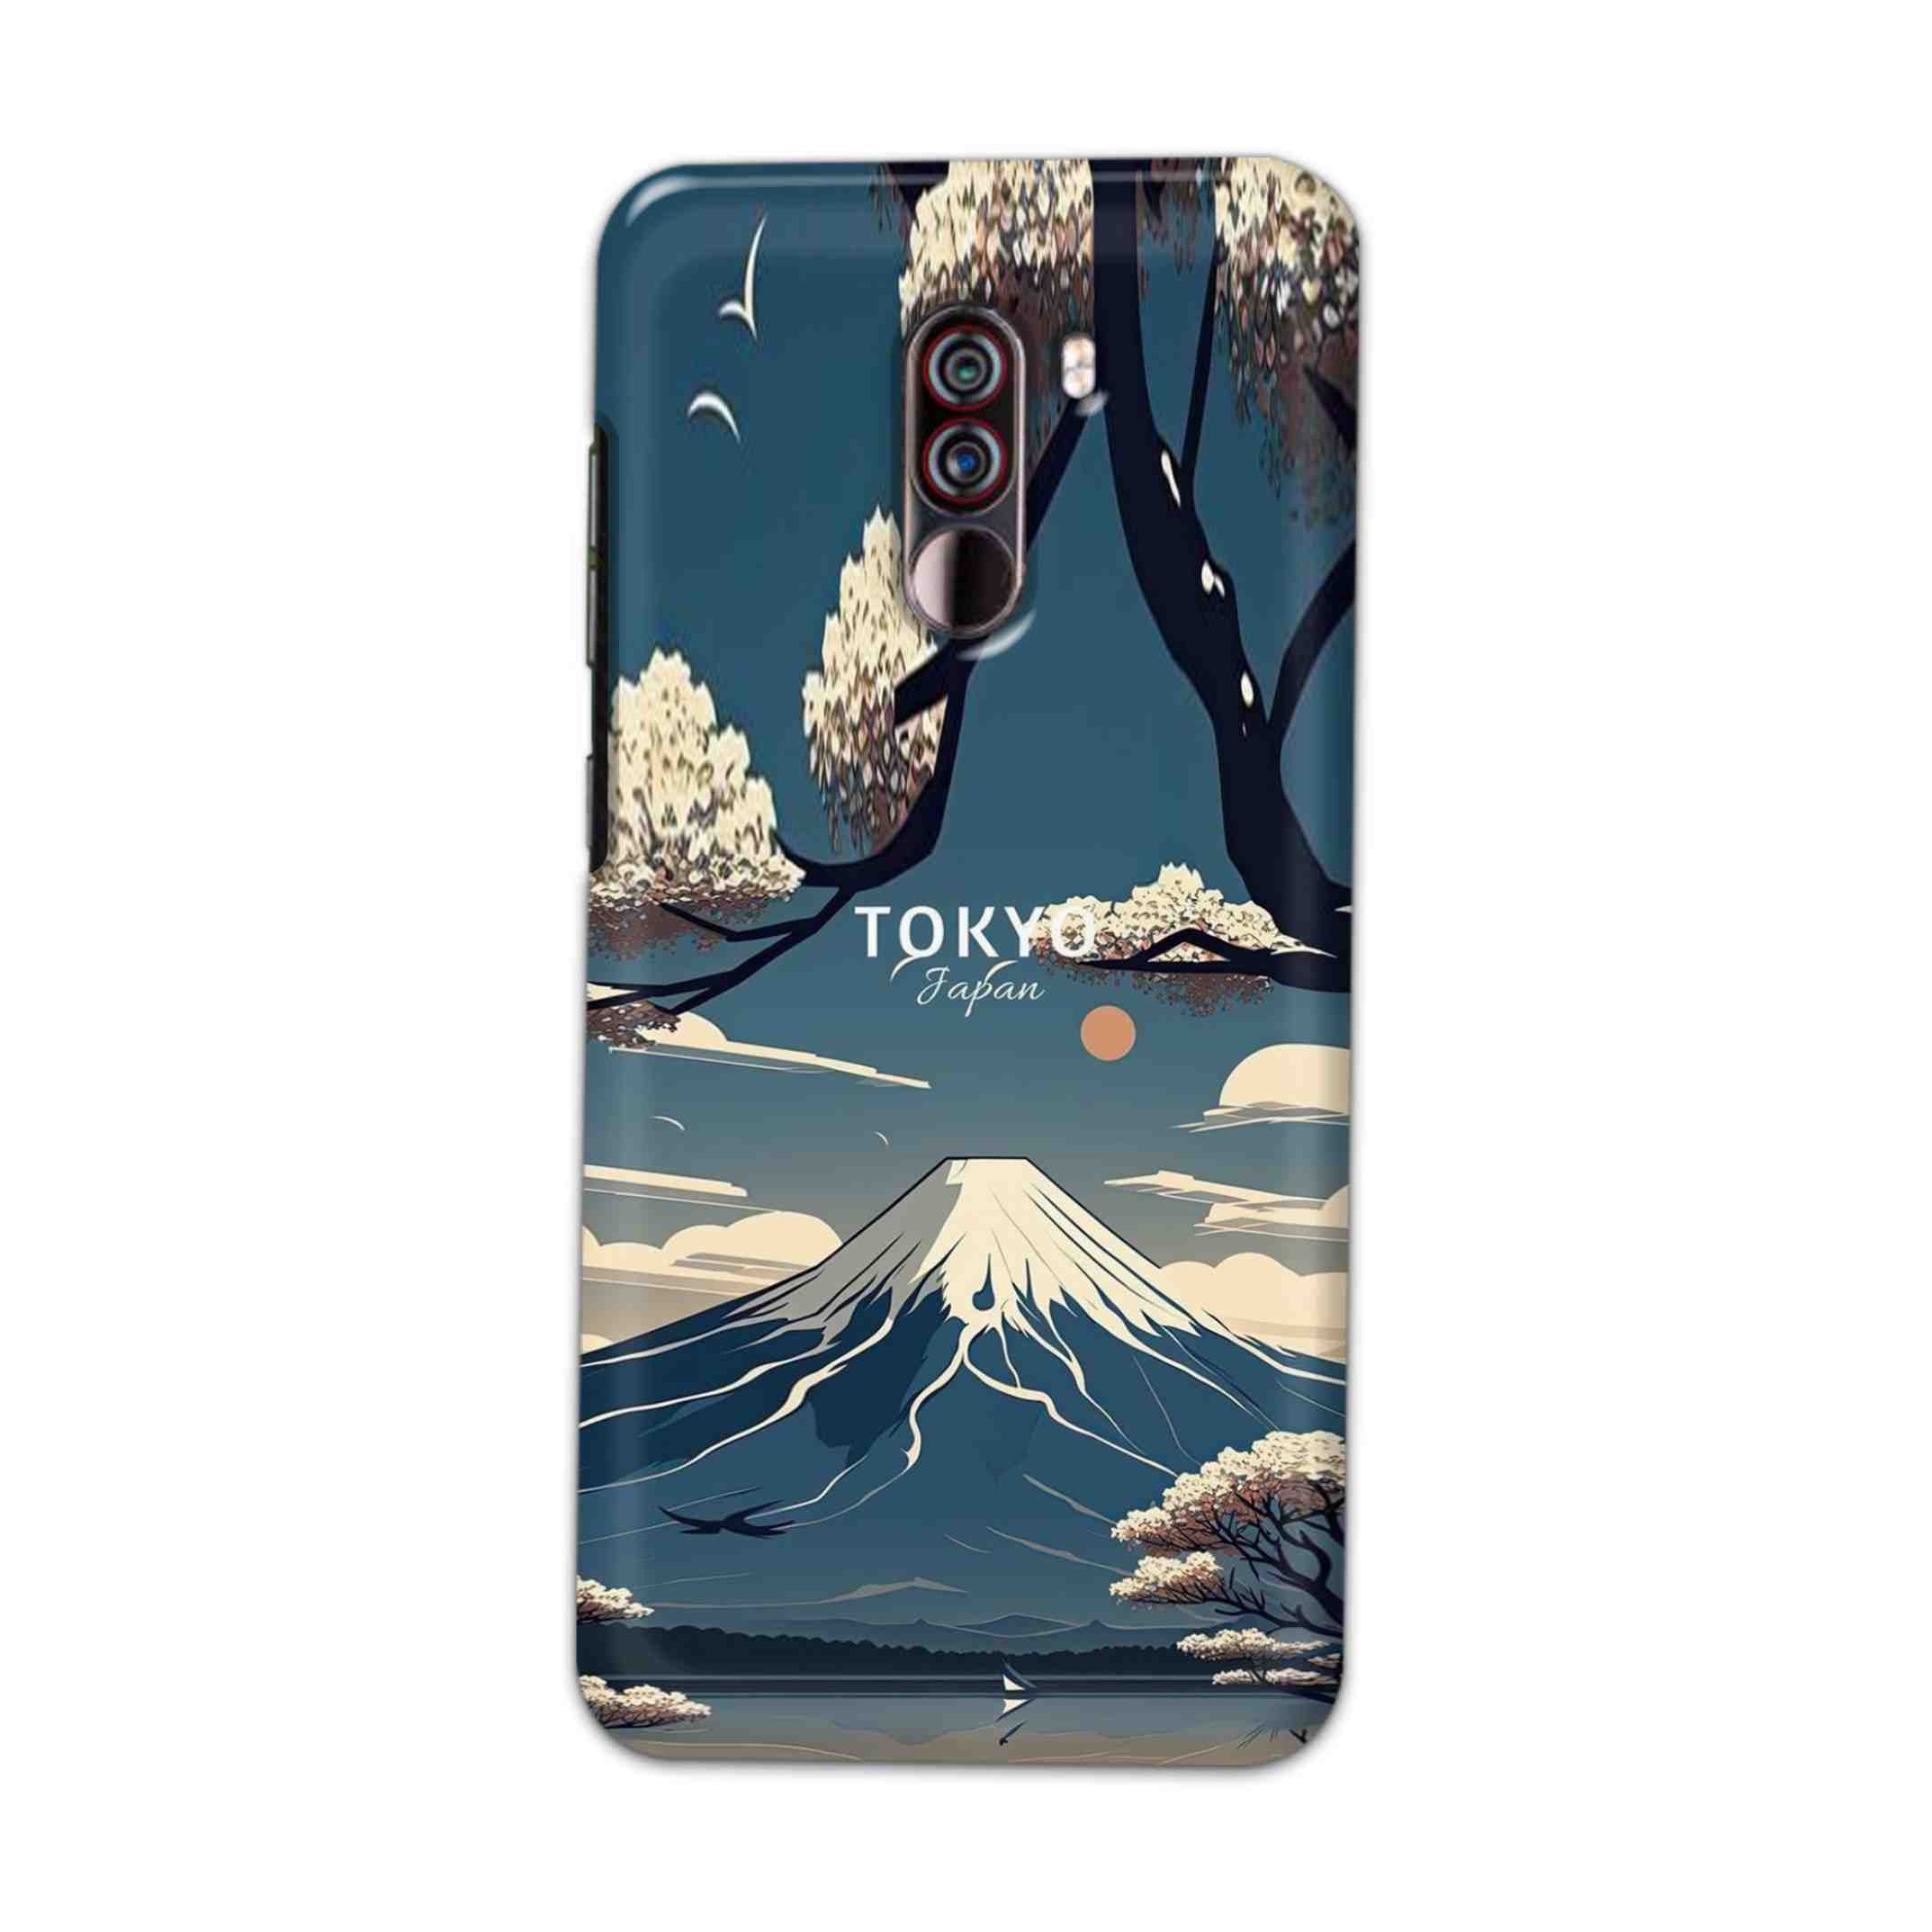 Buy Tokyo Hard Back Mobile Phone Case Cover For Xiaomi Pocophone F1 Online